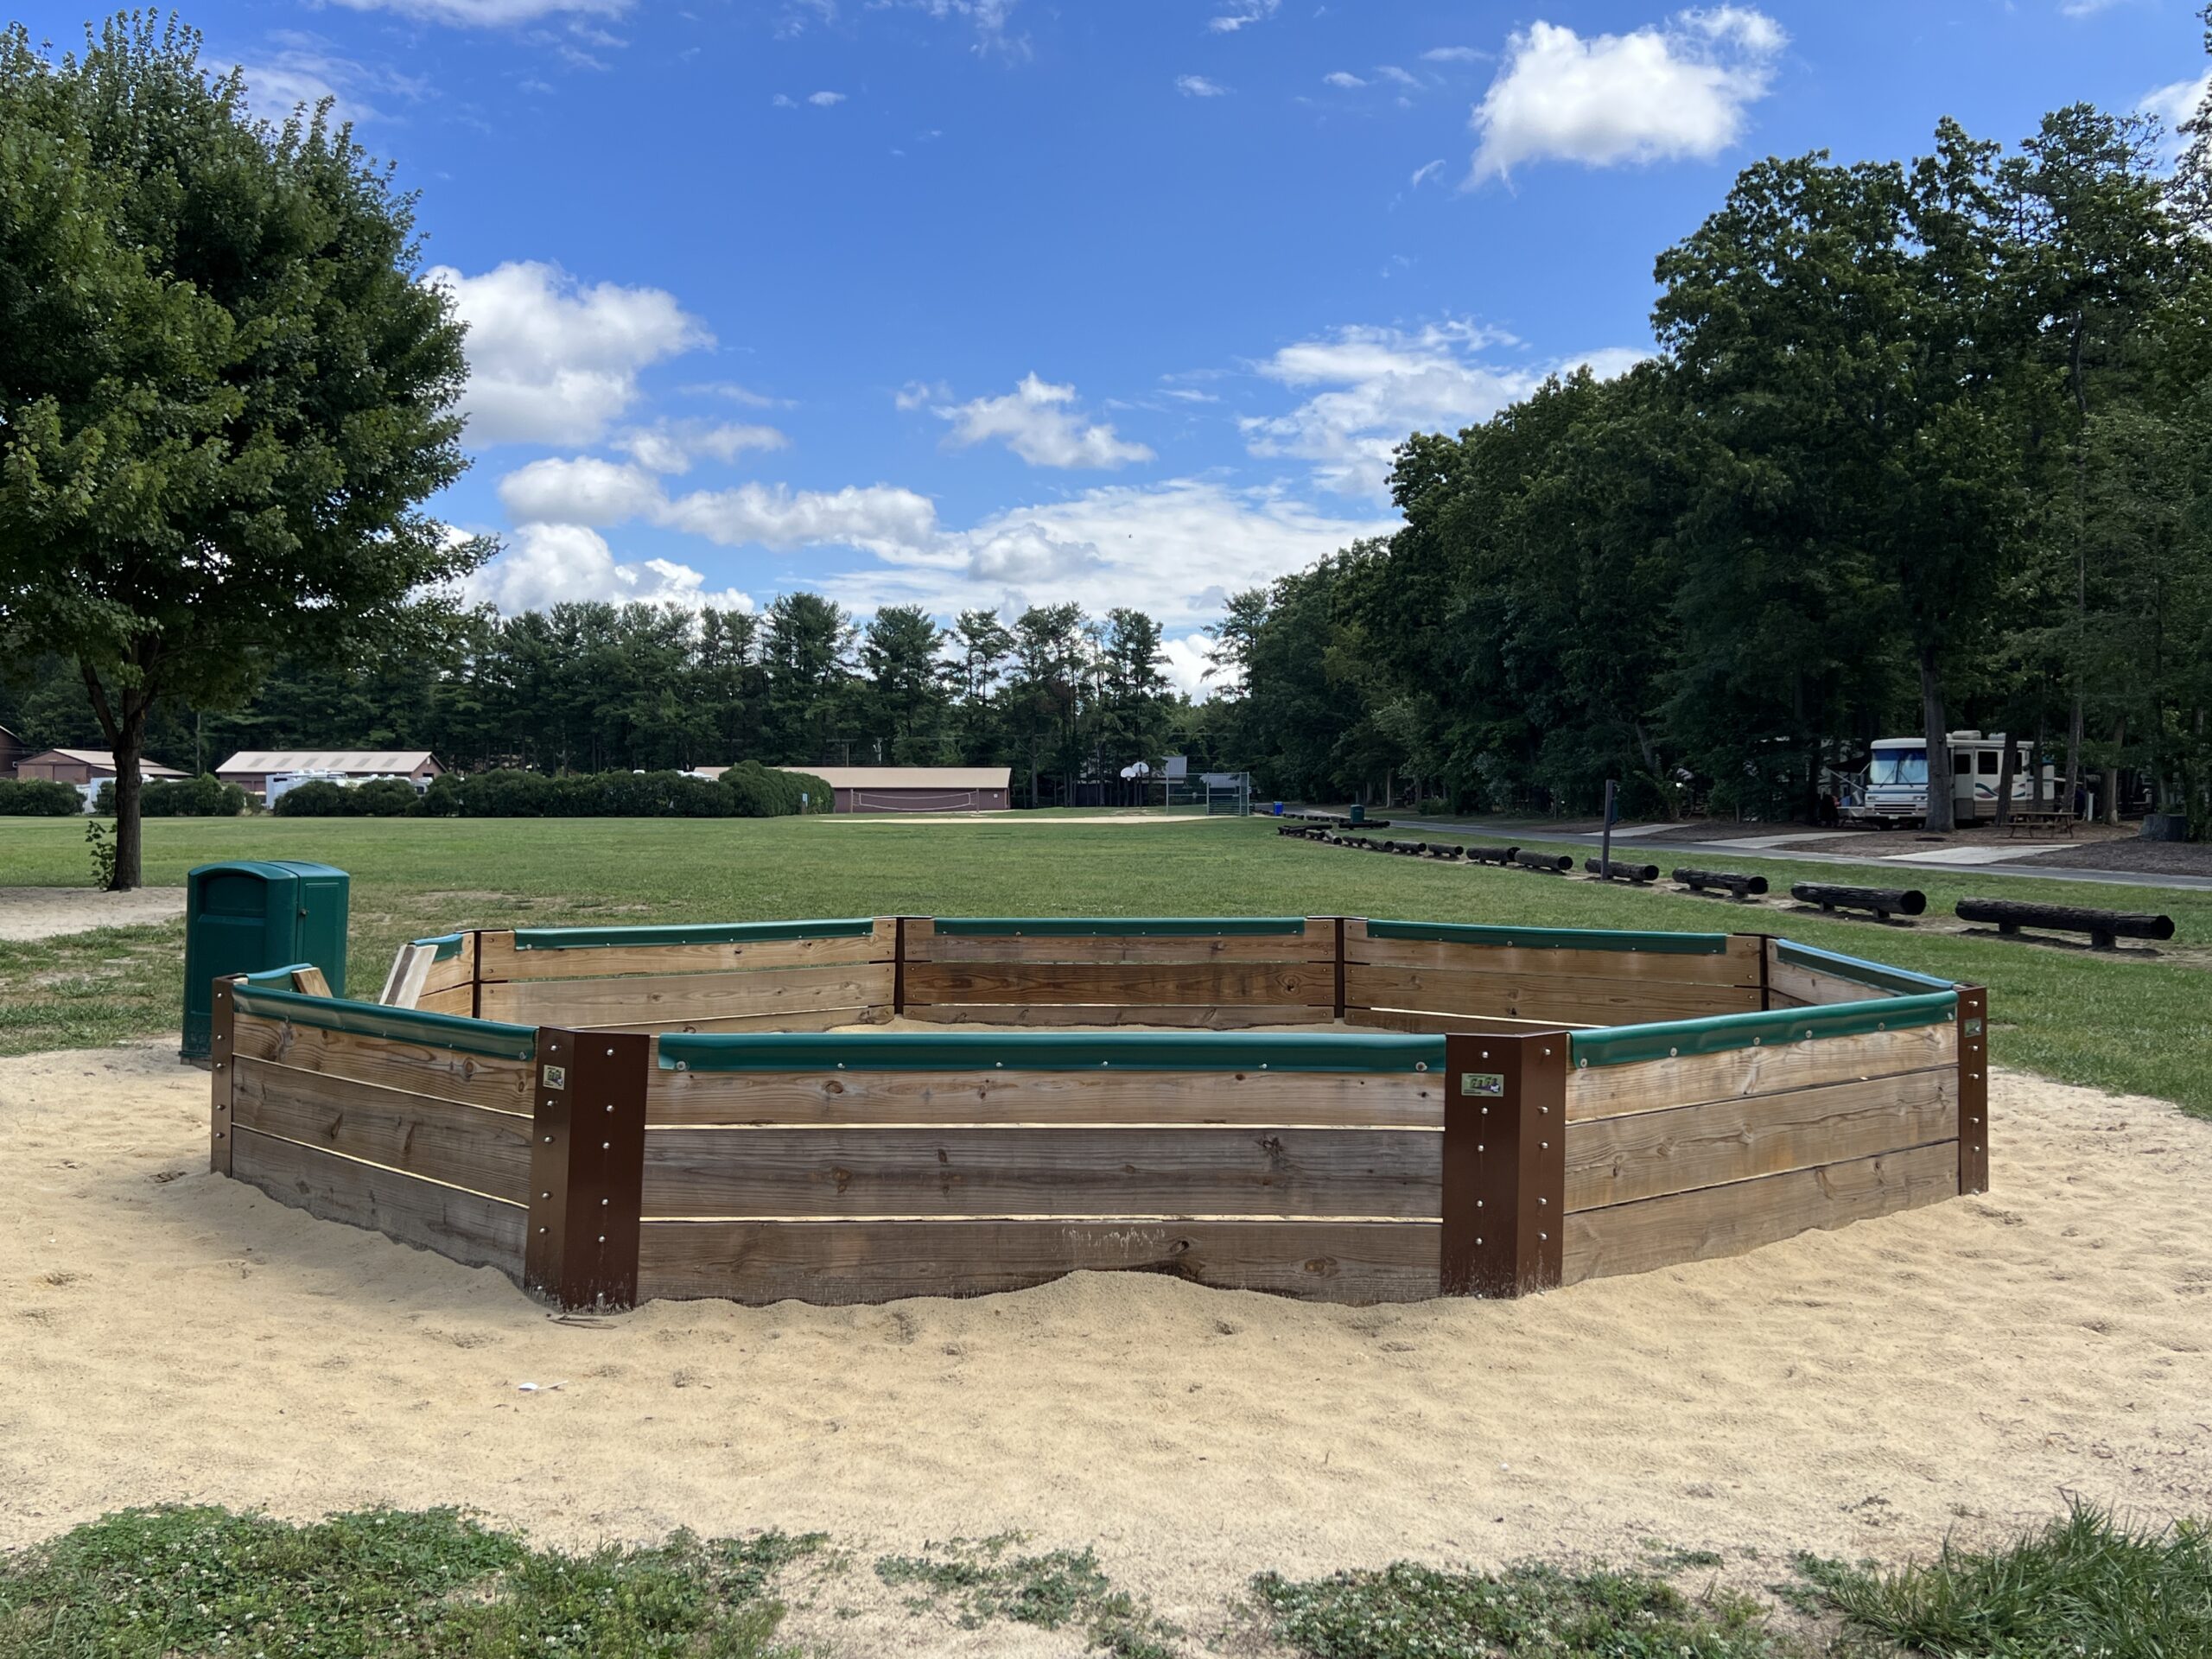 Gaga Ball pit at Jellystone Park South Jersey WIDE image